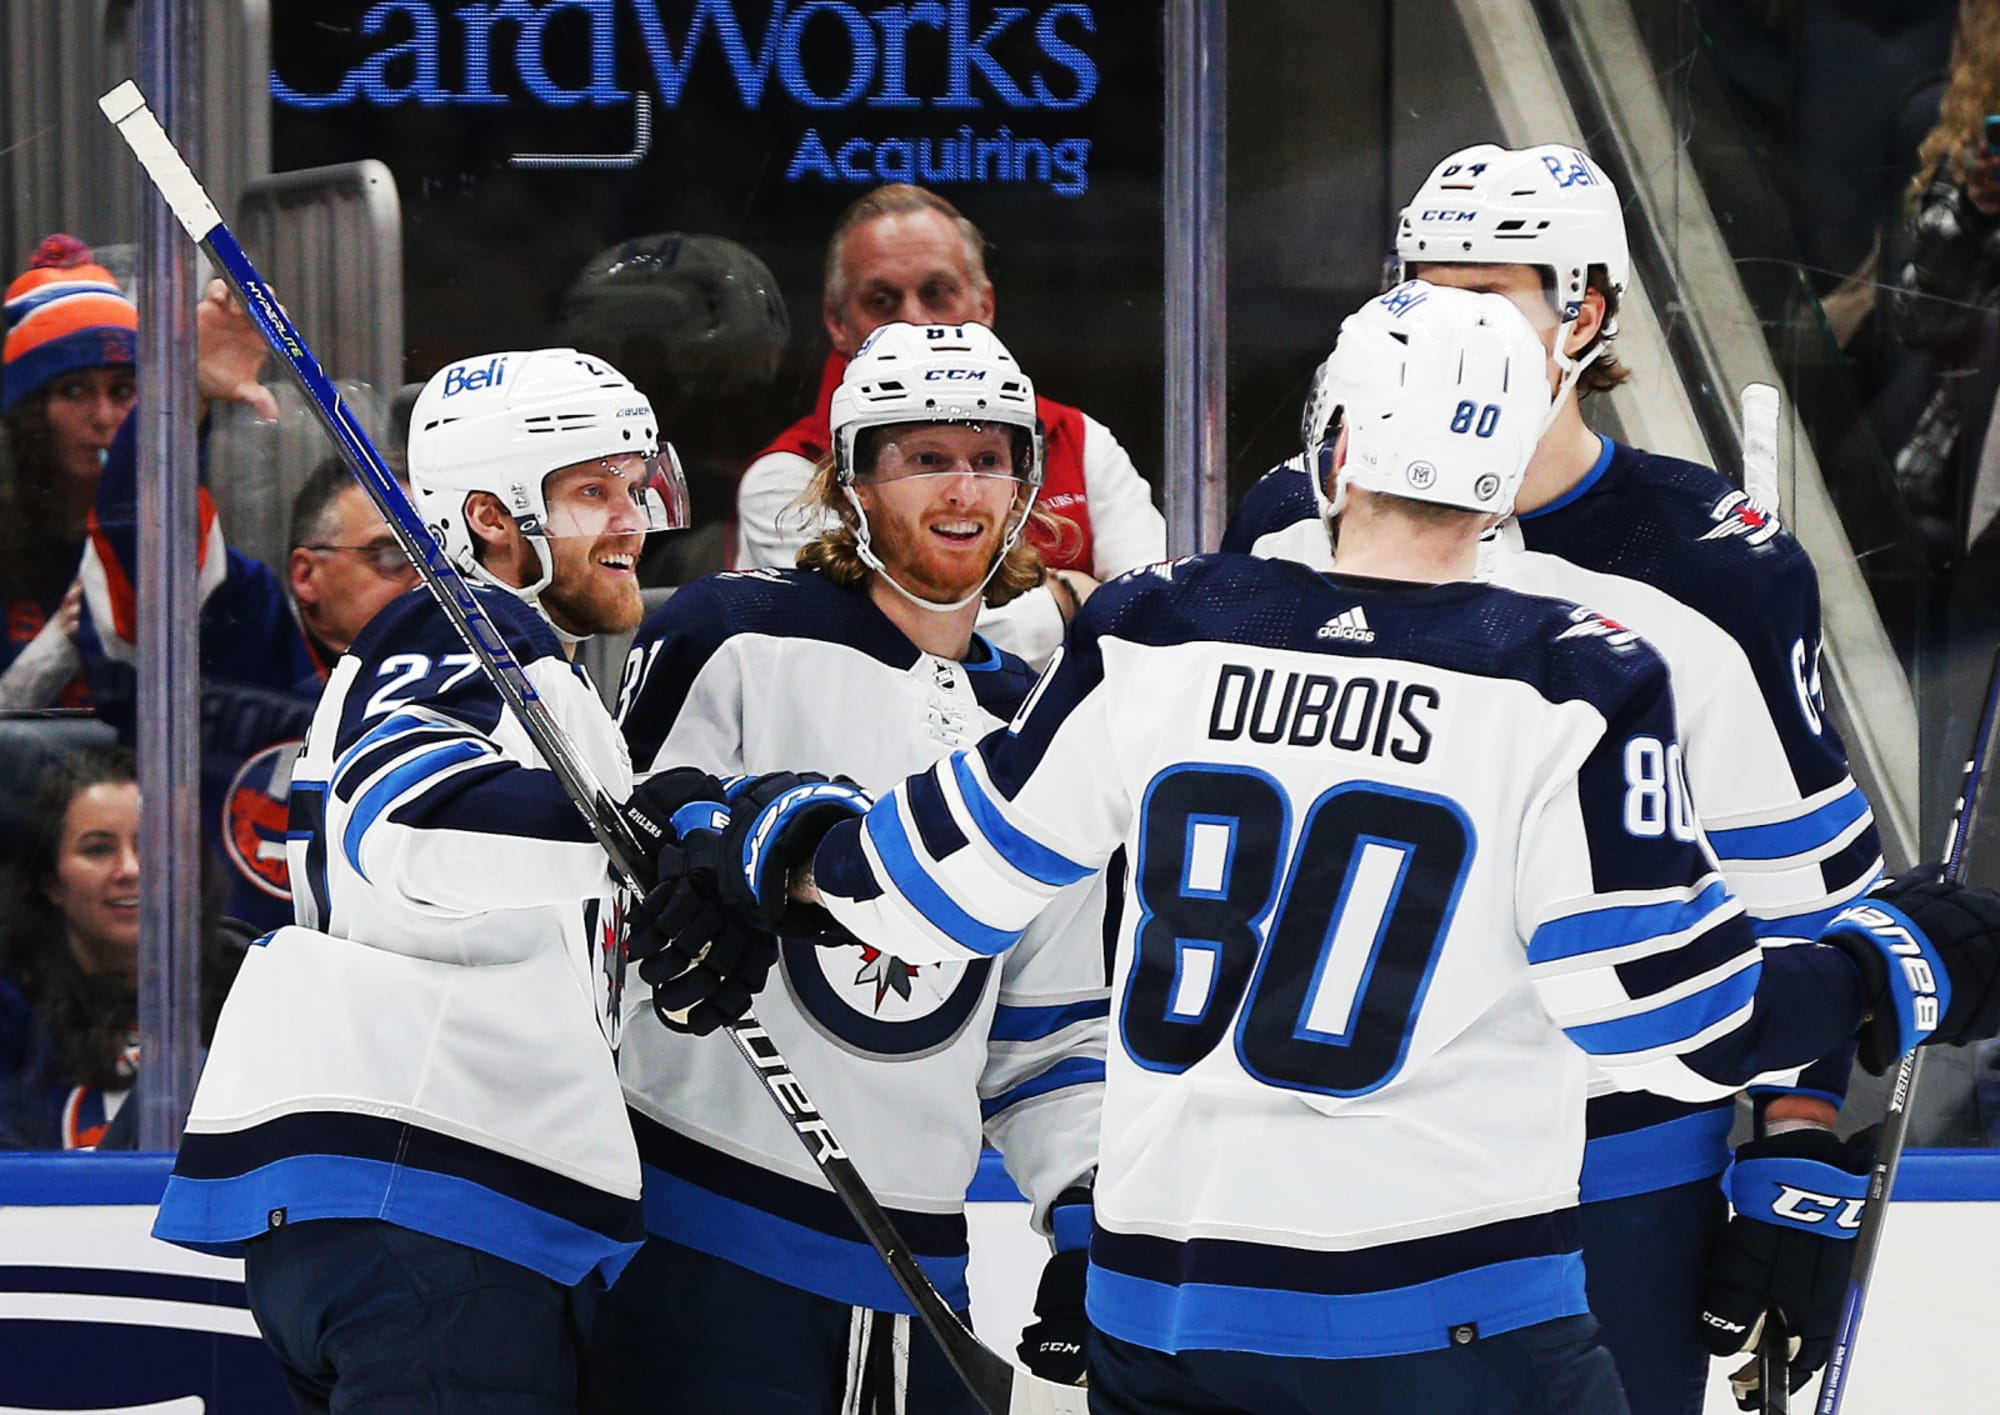 SportsCenter - The Winnipeg Jets are flying into The Stanley Cup